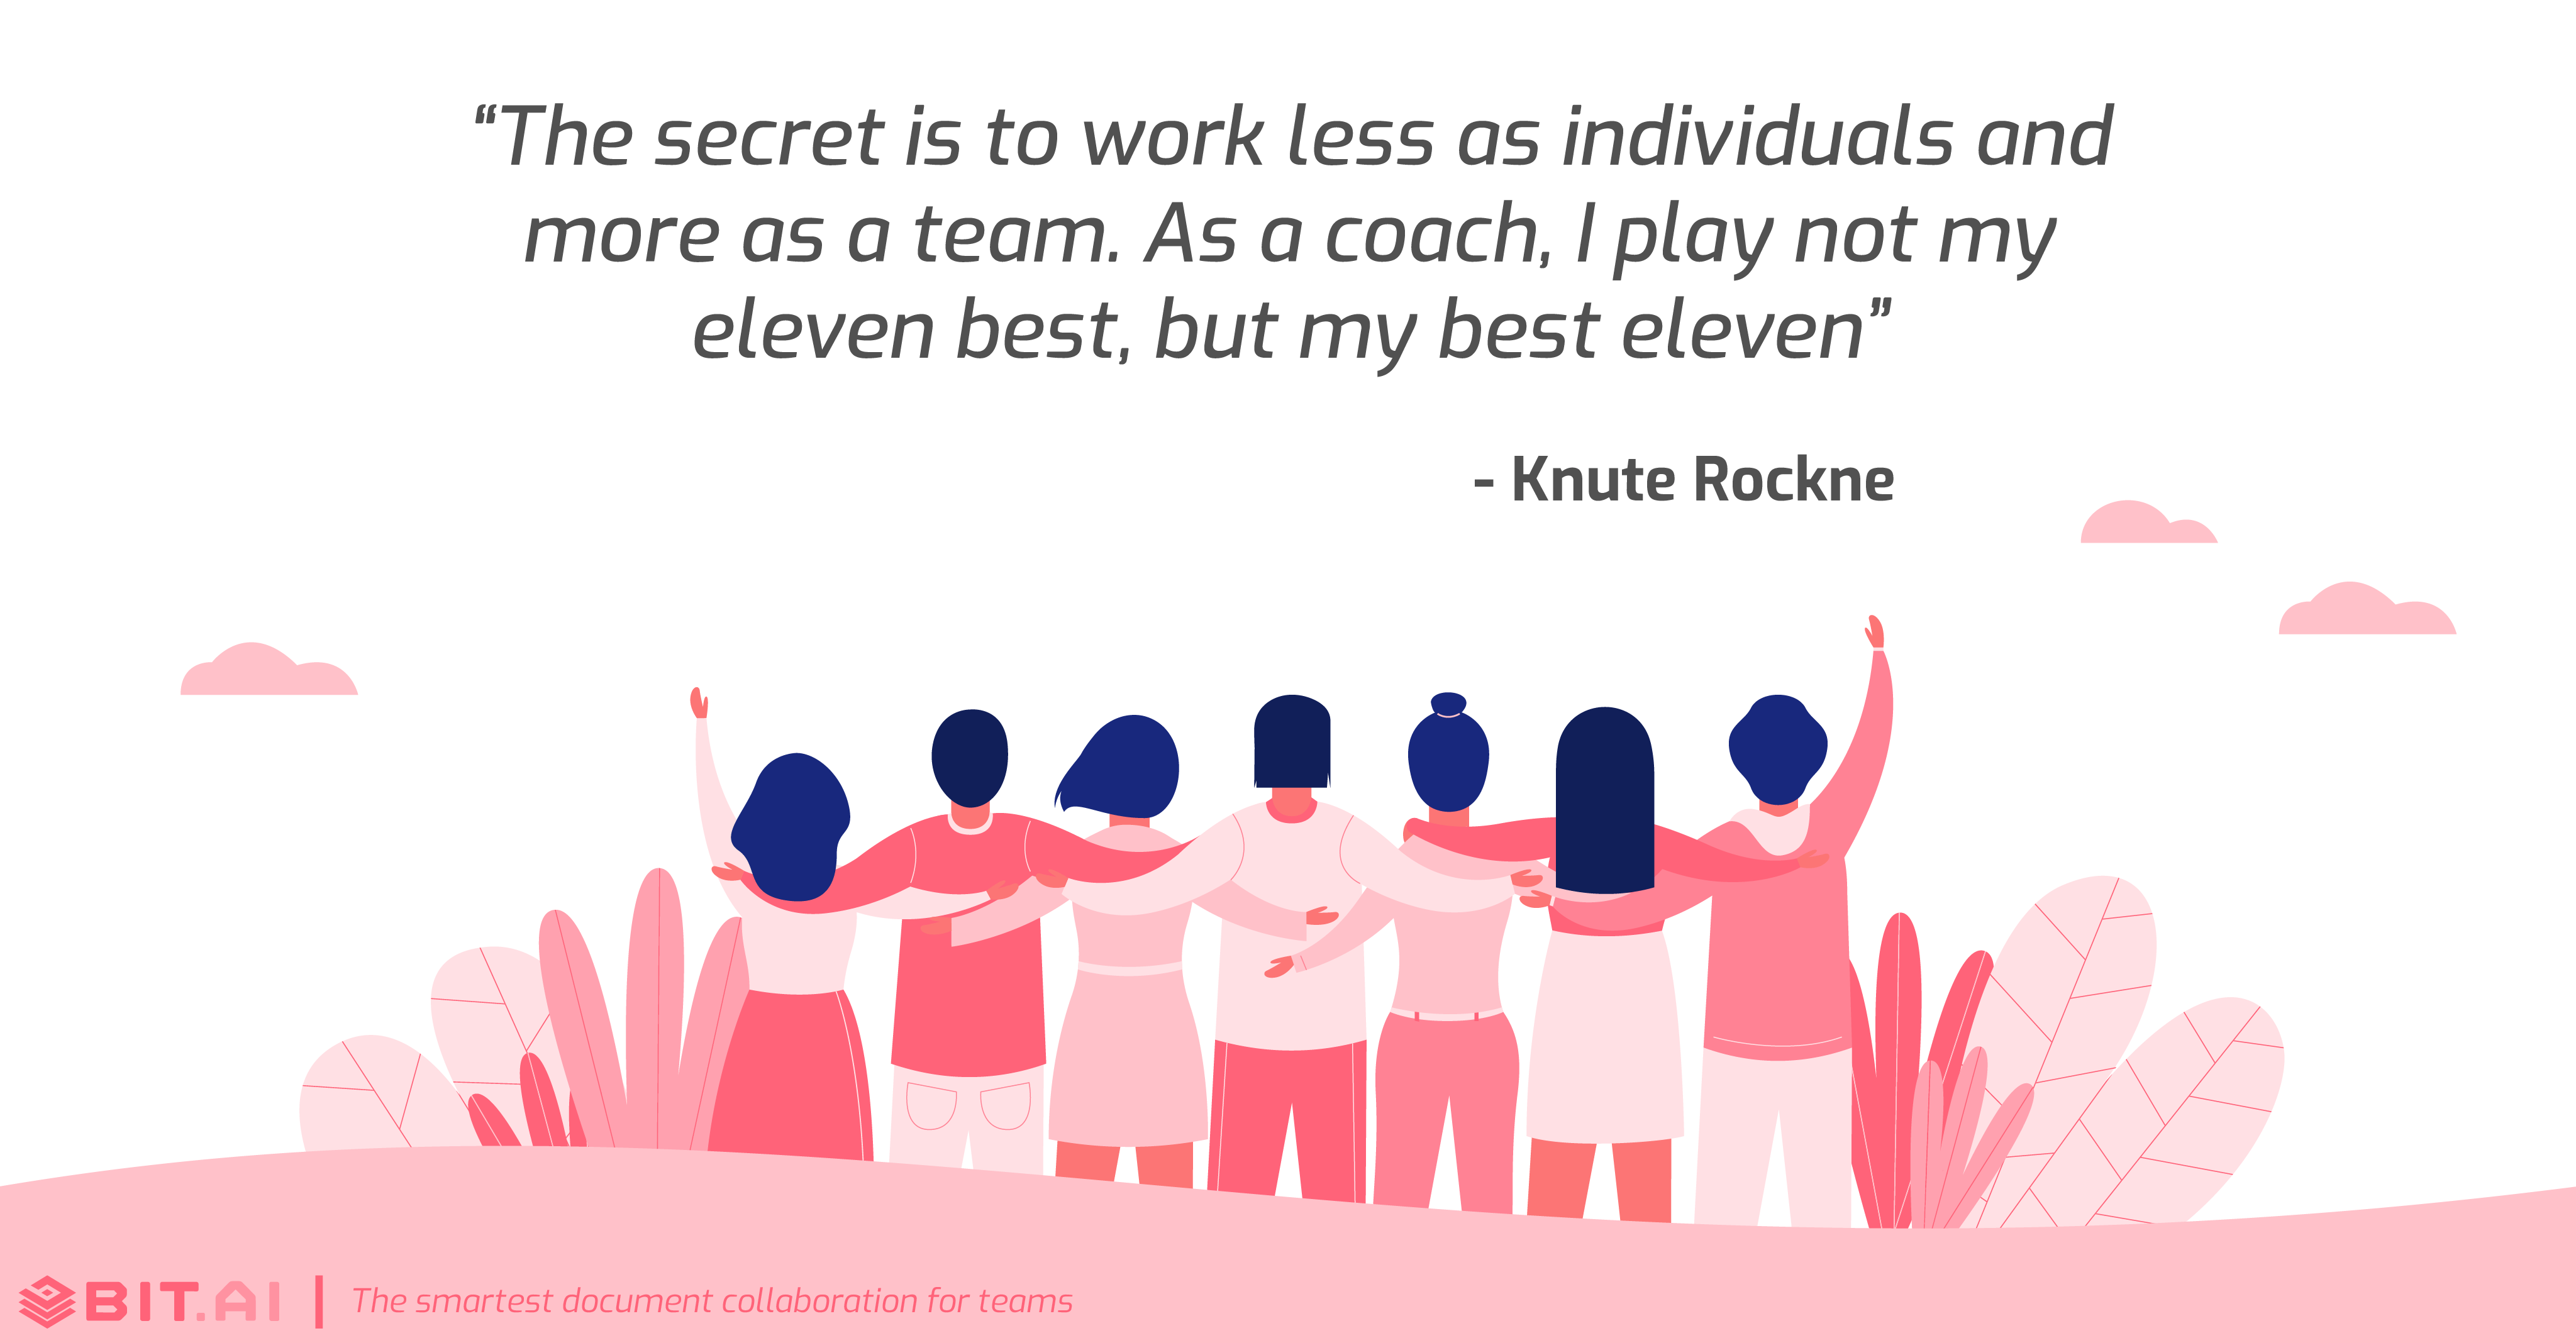 the secret is to work less as individuals and more as a team. as a coach, i play not my eleven best, but my best eleven. knute rockne